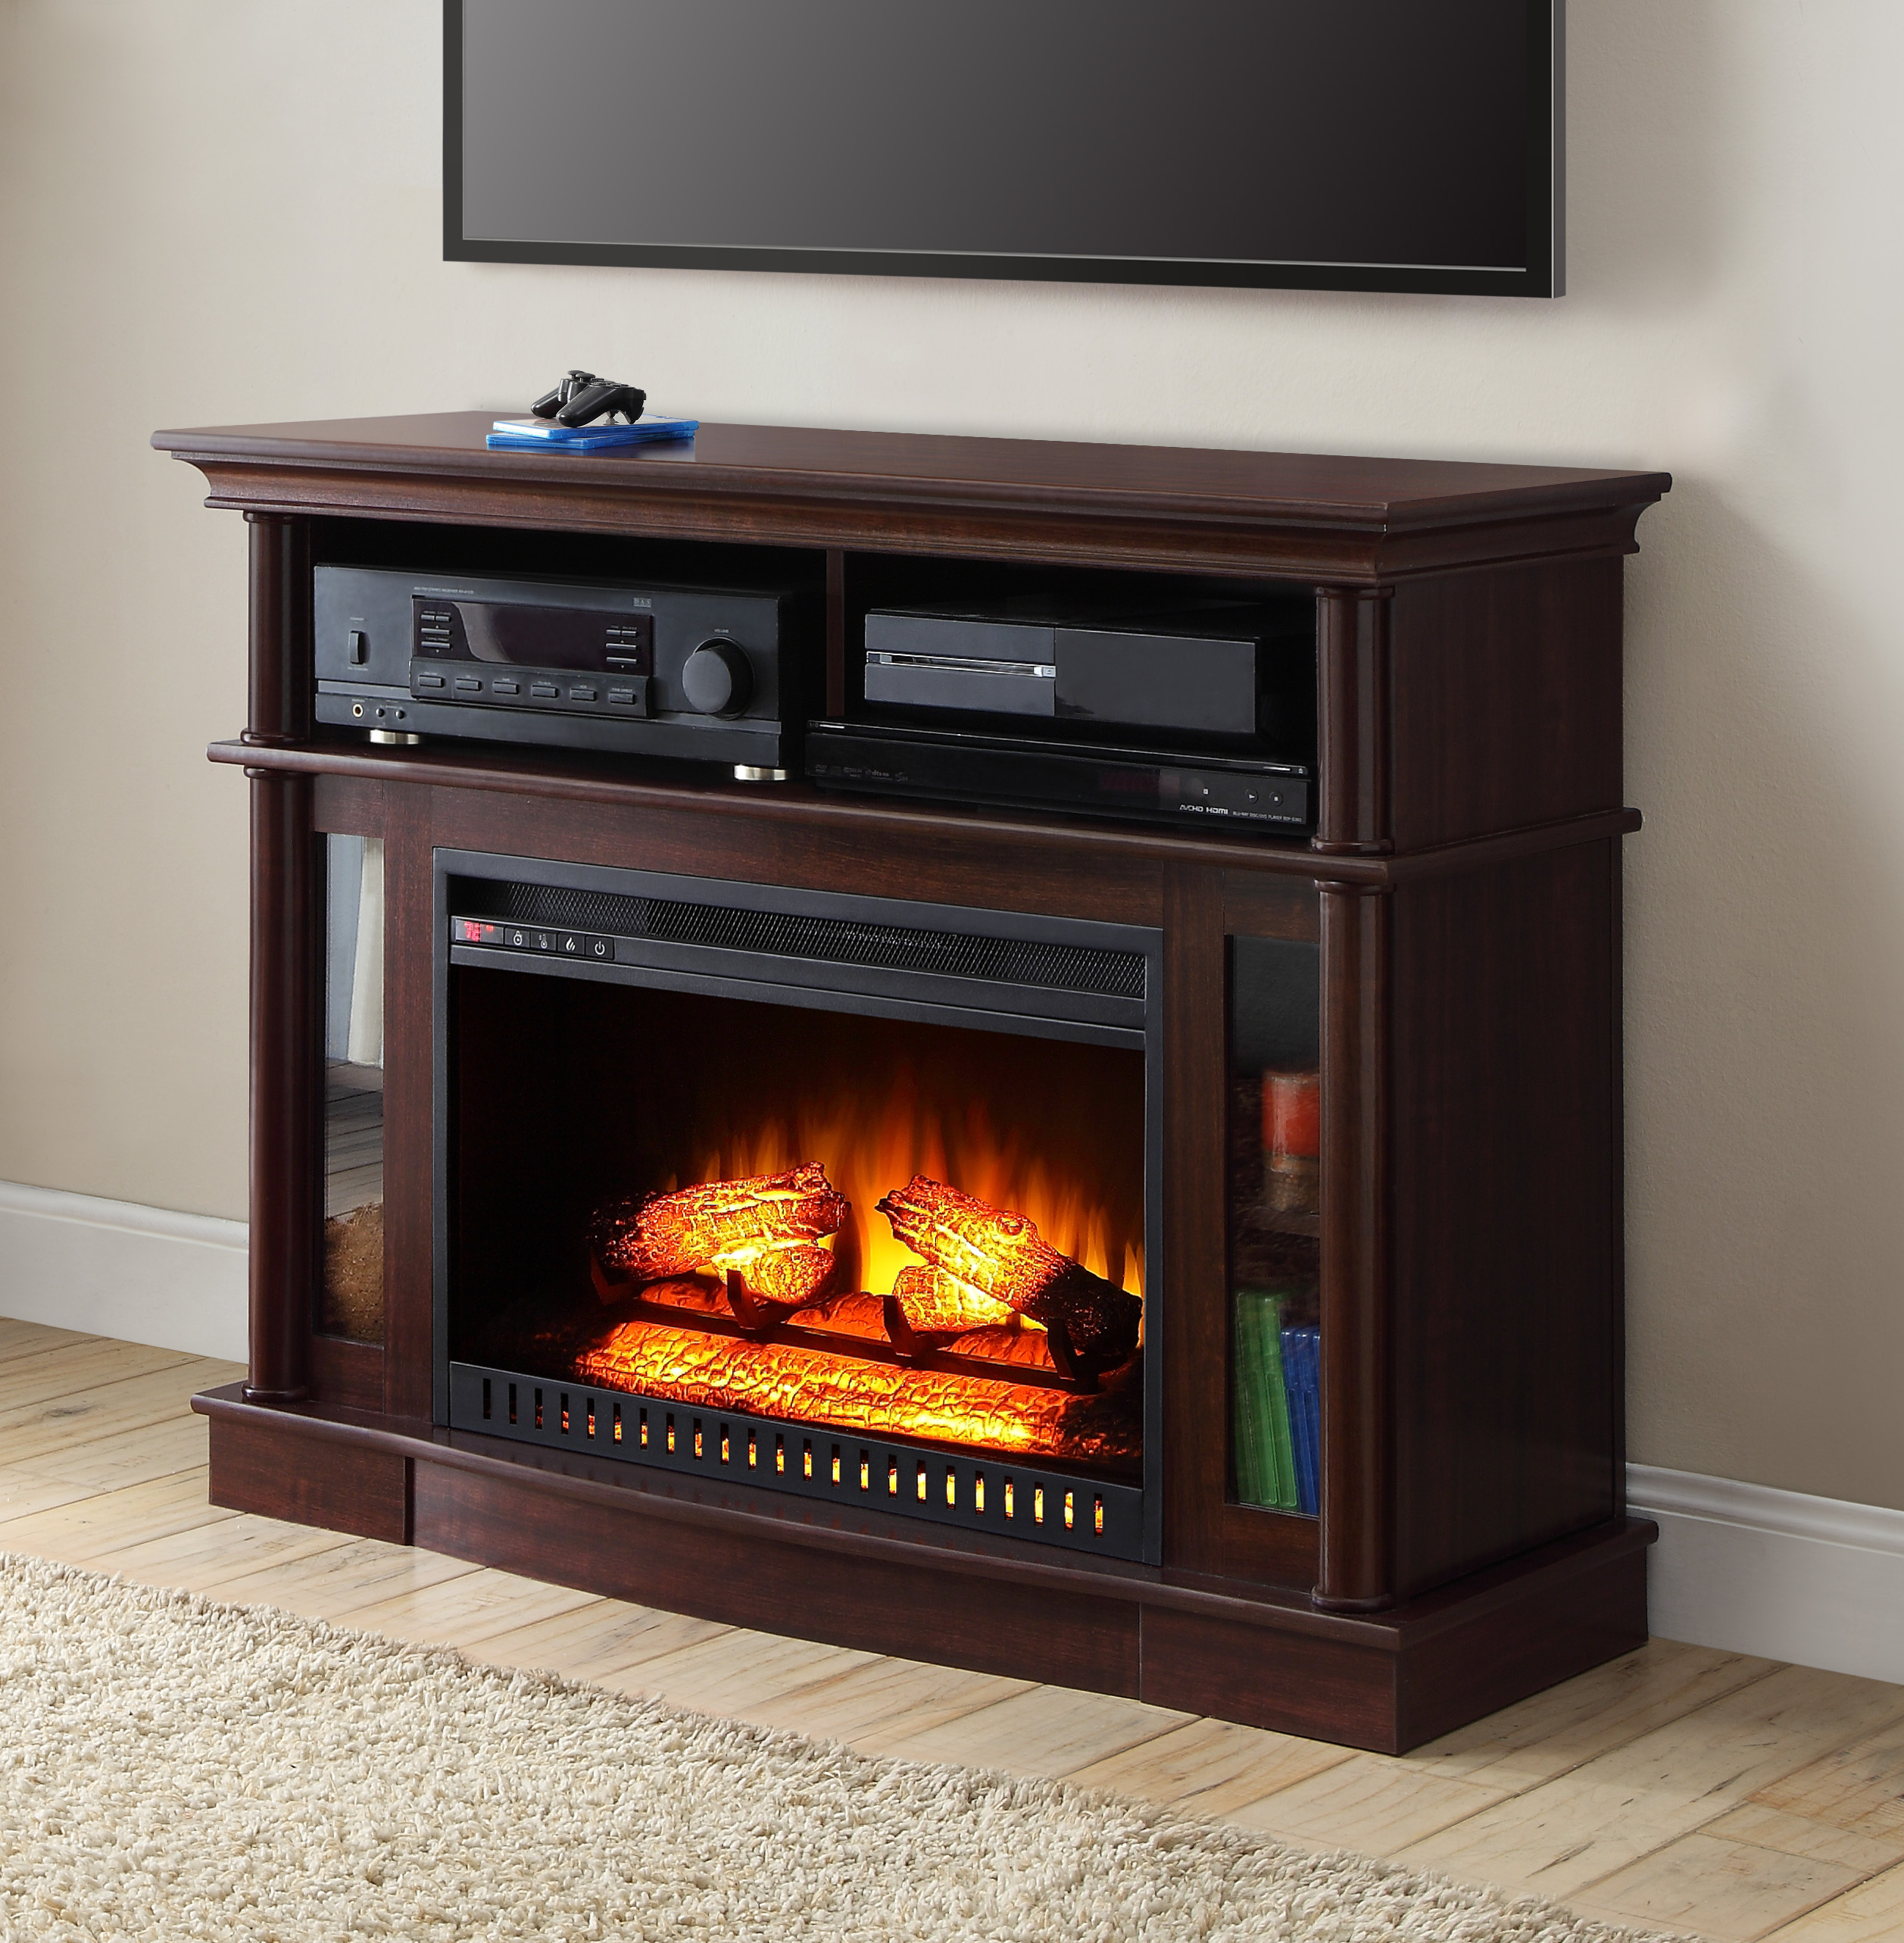 Better Homes & Gardens Ashwood Road Media Fireplace for TVs up to 45" - image 1 of 13